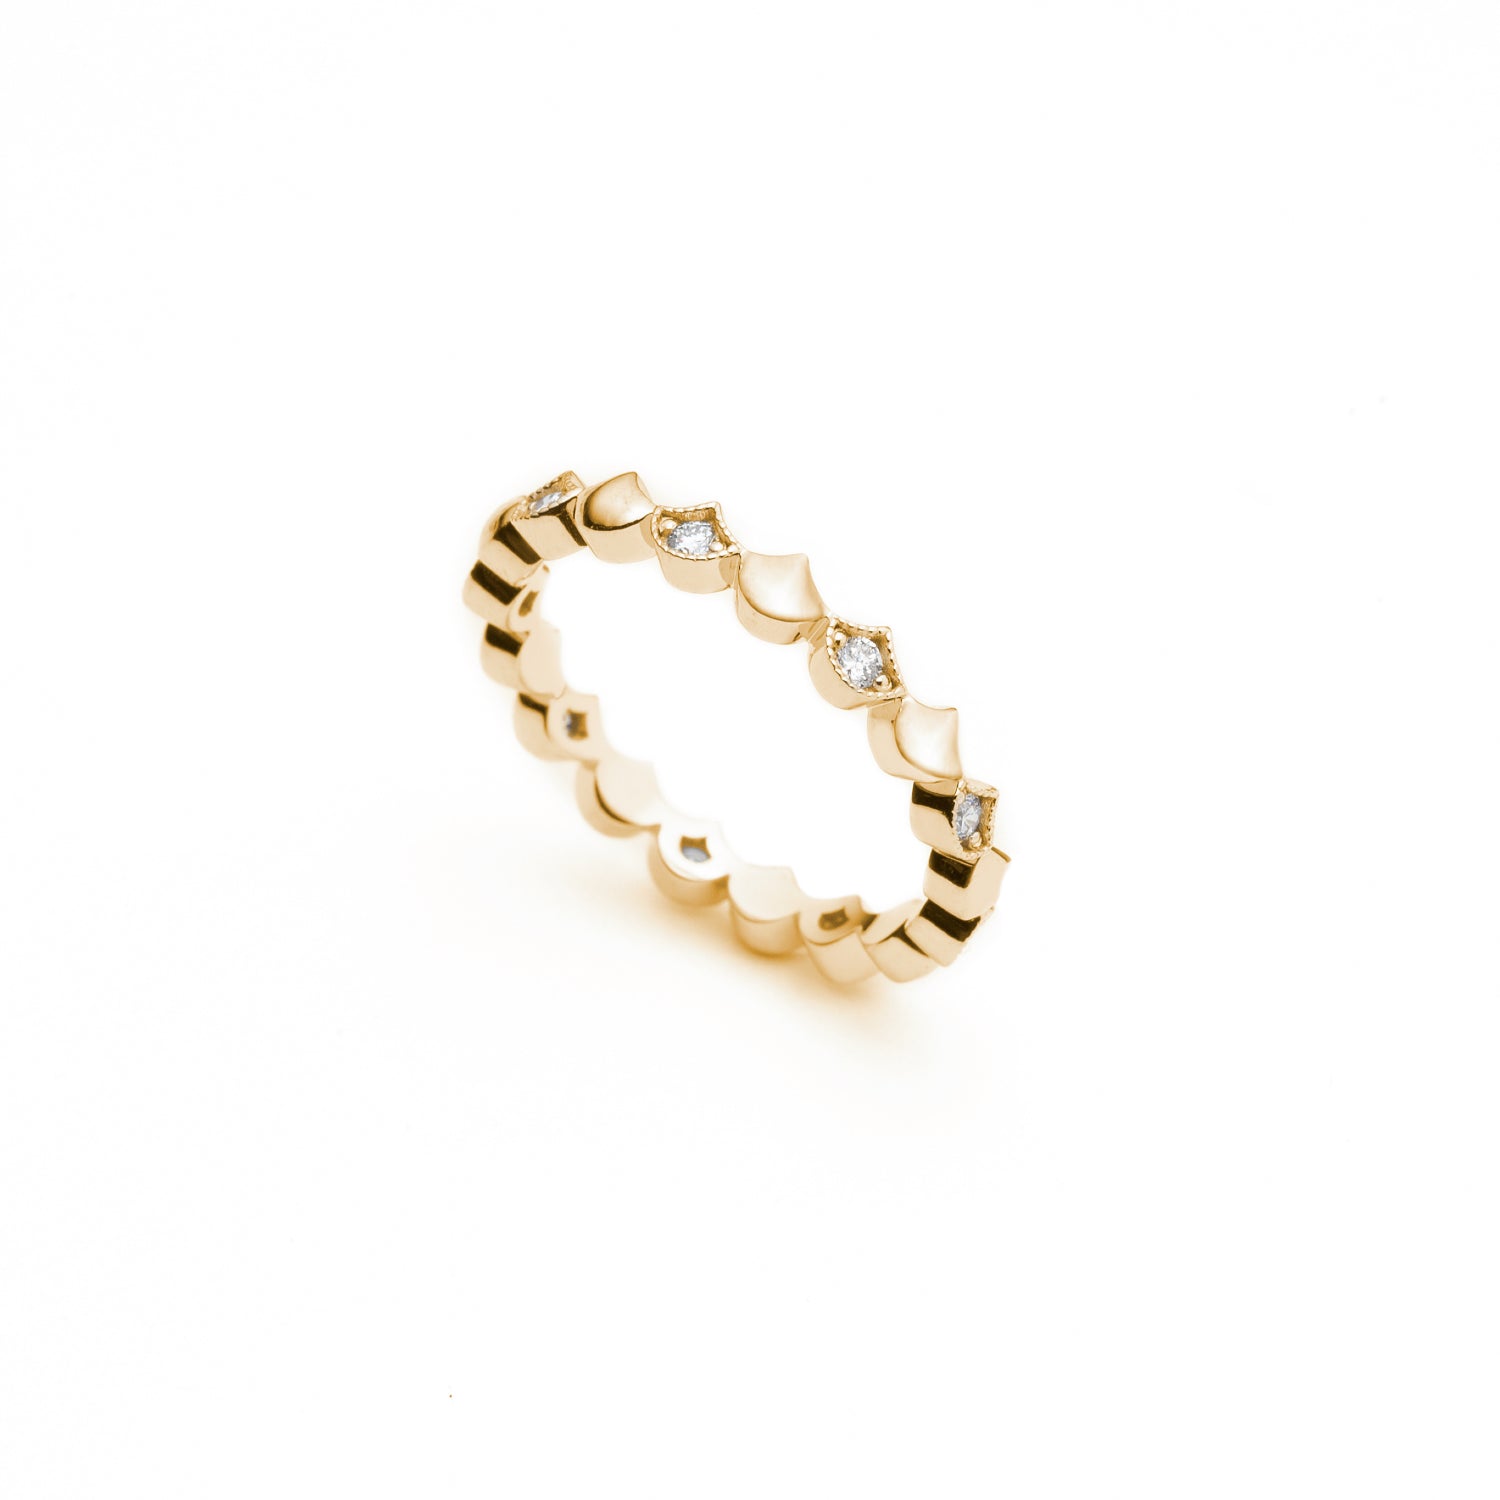 Alternating Lepia Mermaid Scales Motif Diamond Eternity Ring in Yellow Gold Side View